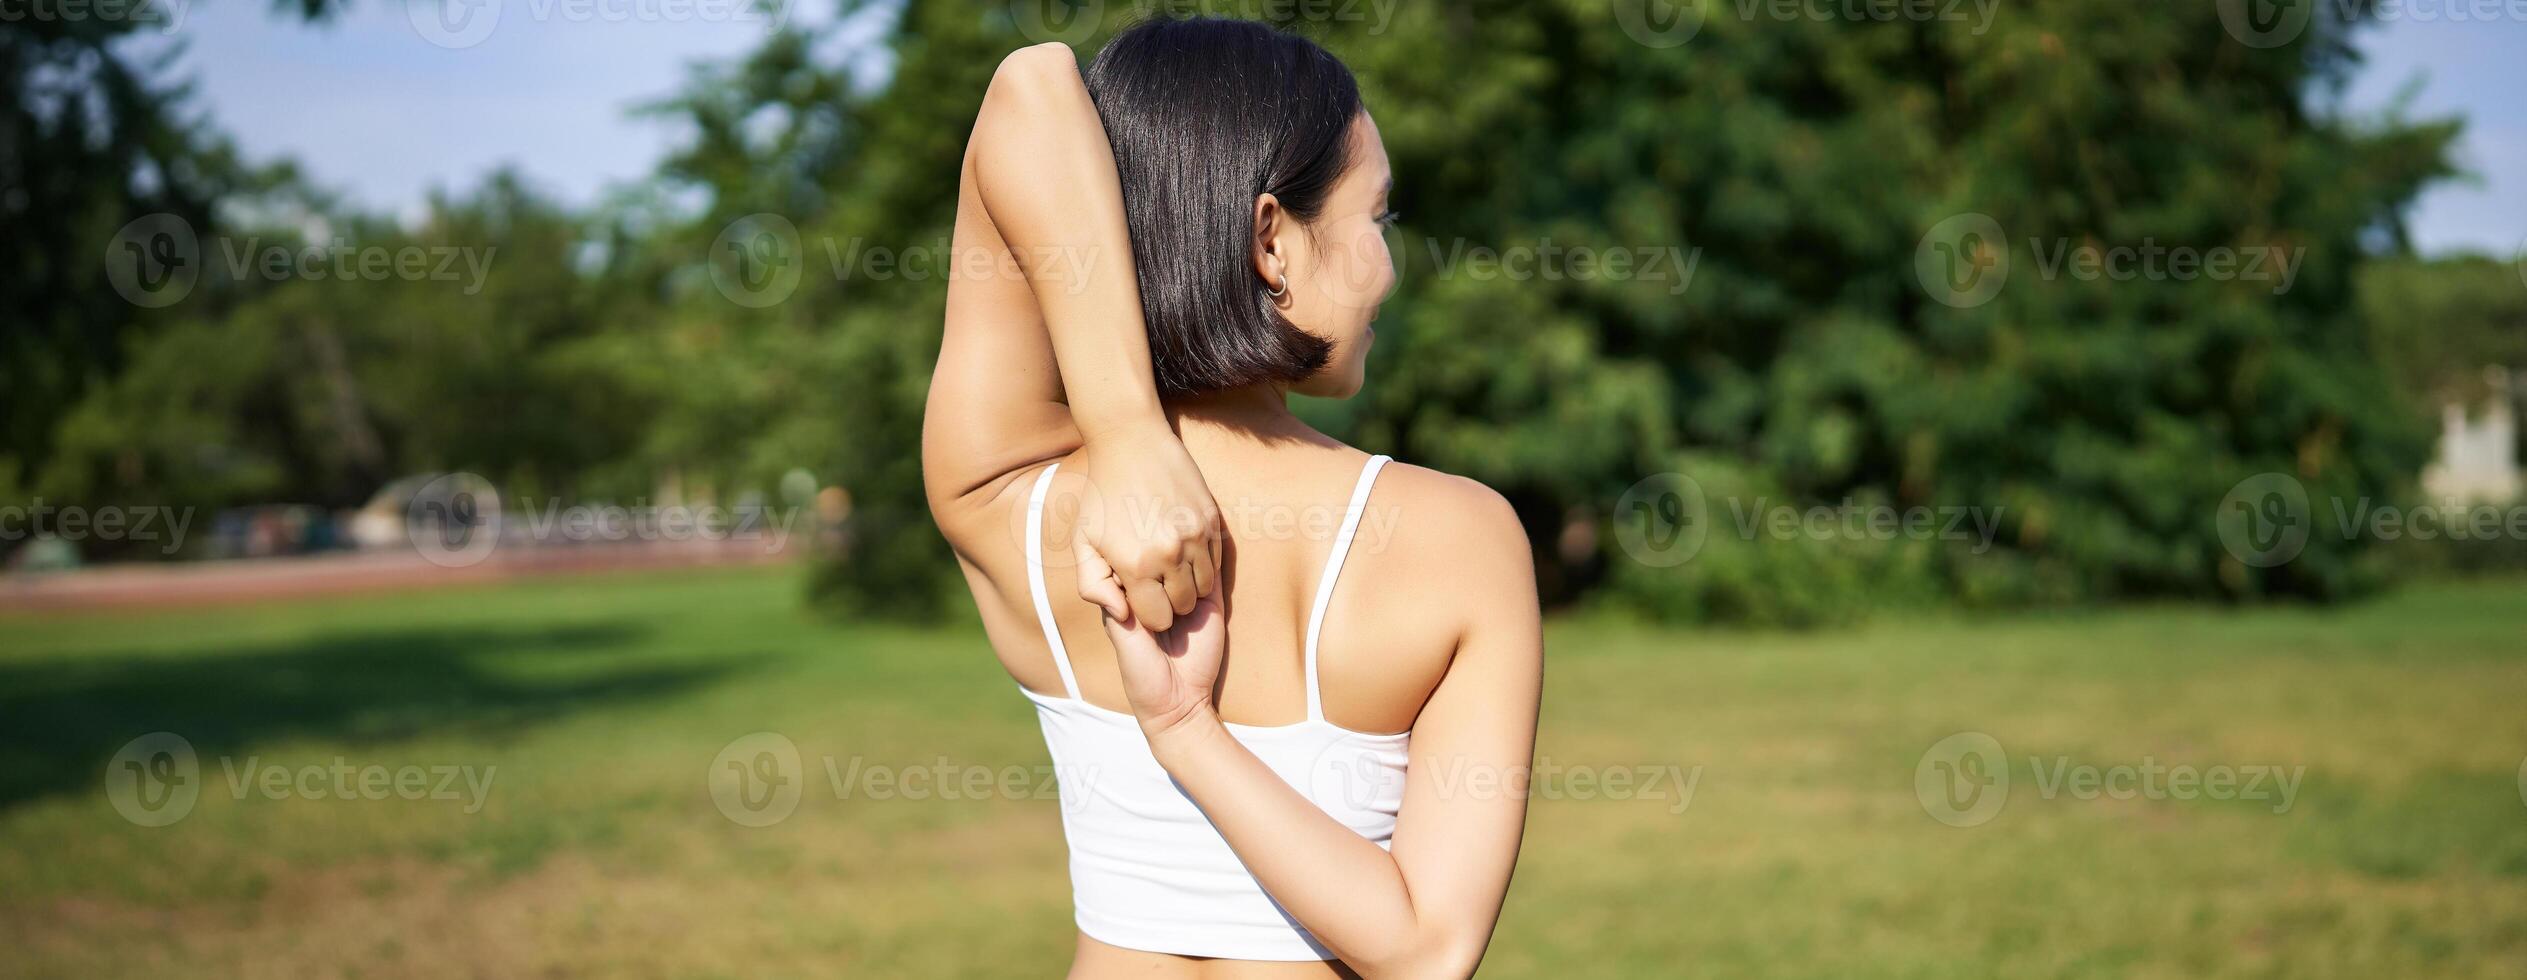 Rear view of young sporty woman stretching her arms behind back, warm-up, prepare for workout jogging, sport event in park photo